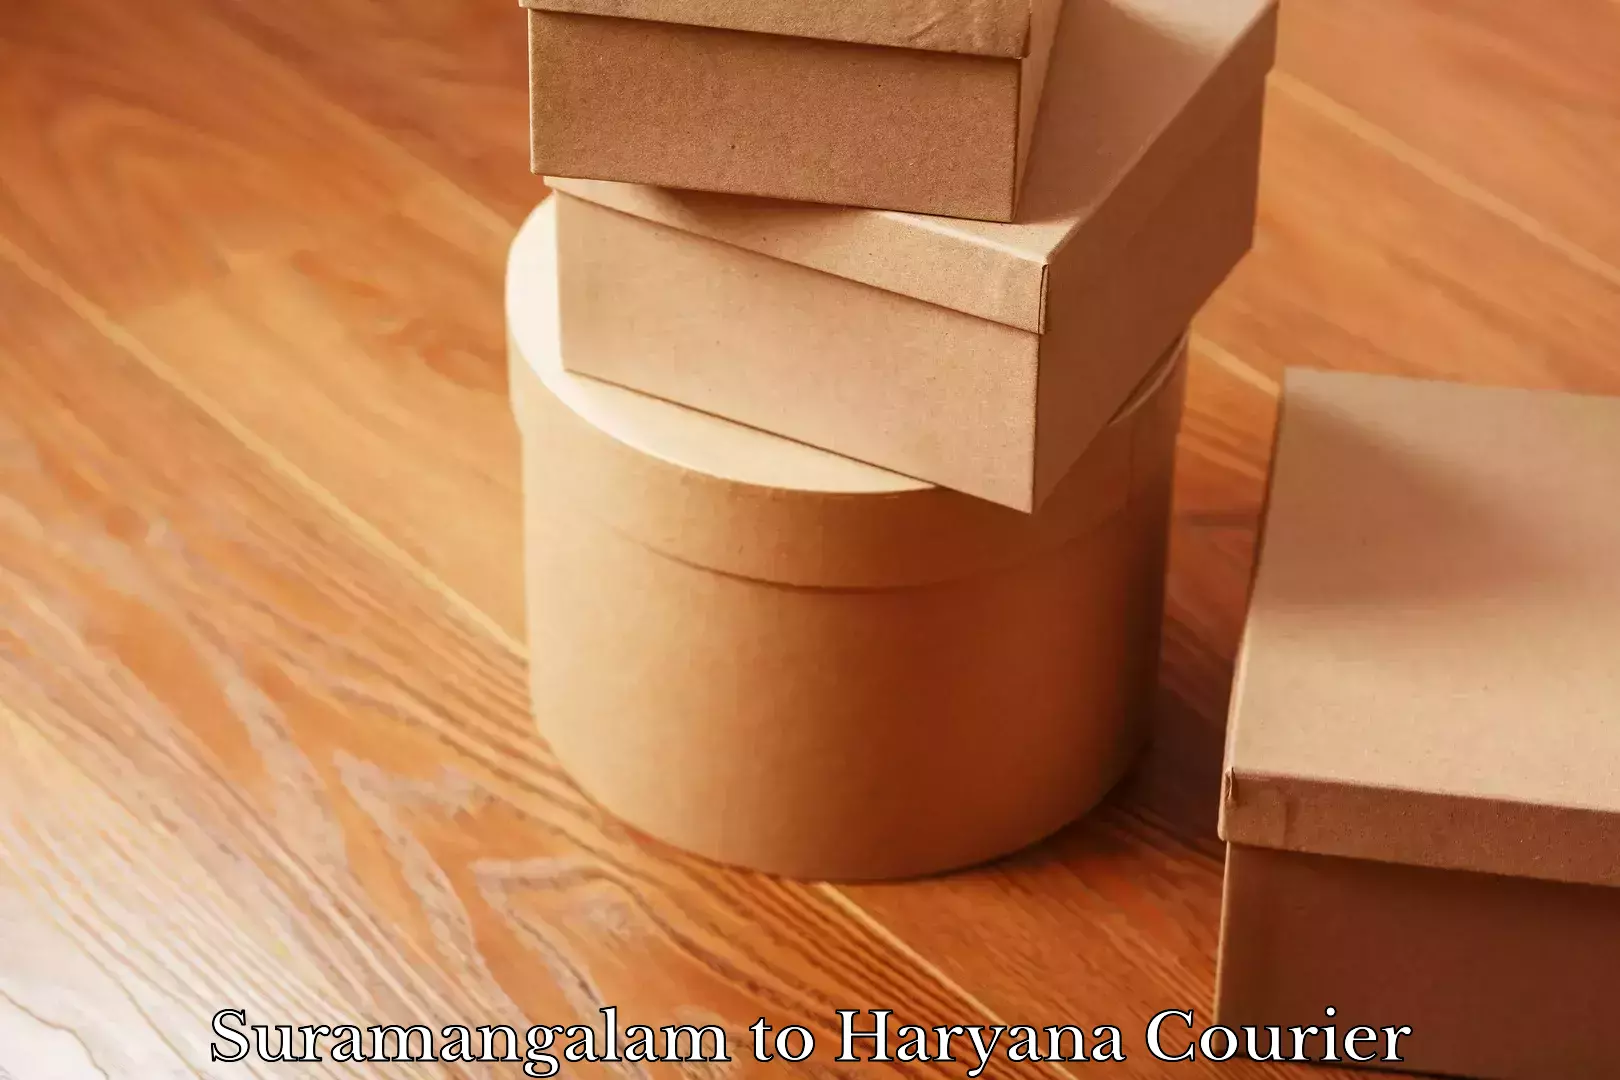 Customer-oriented courier services in Suramangalam to Haryana